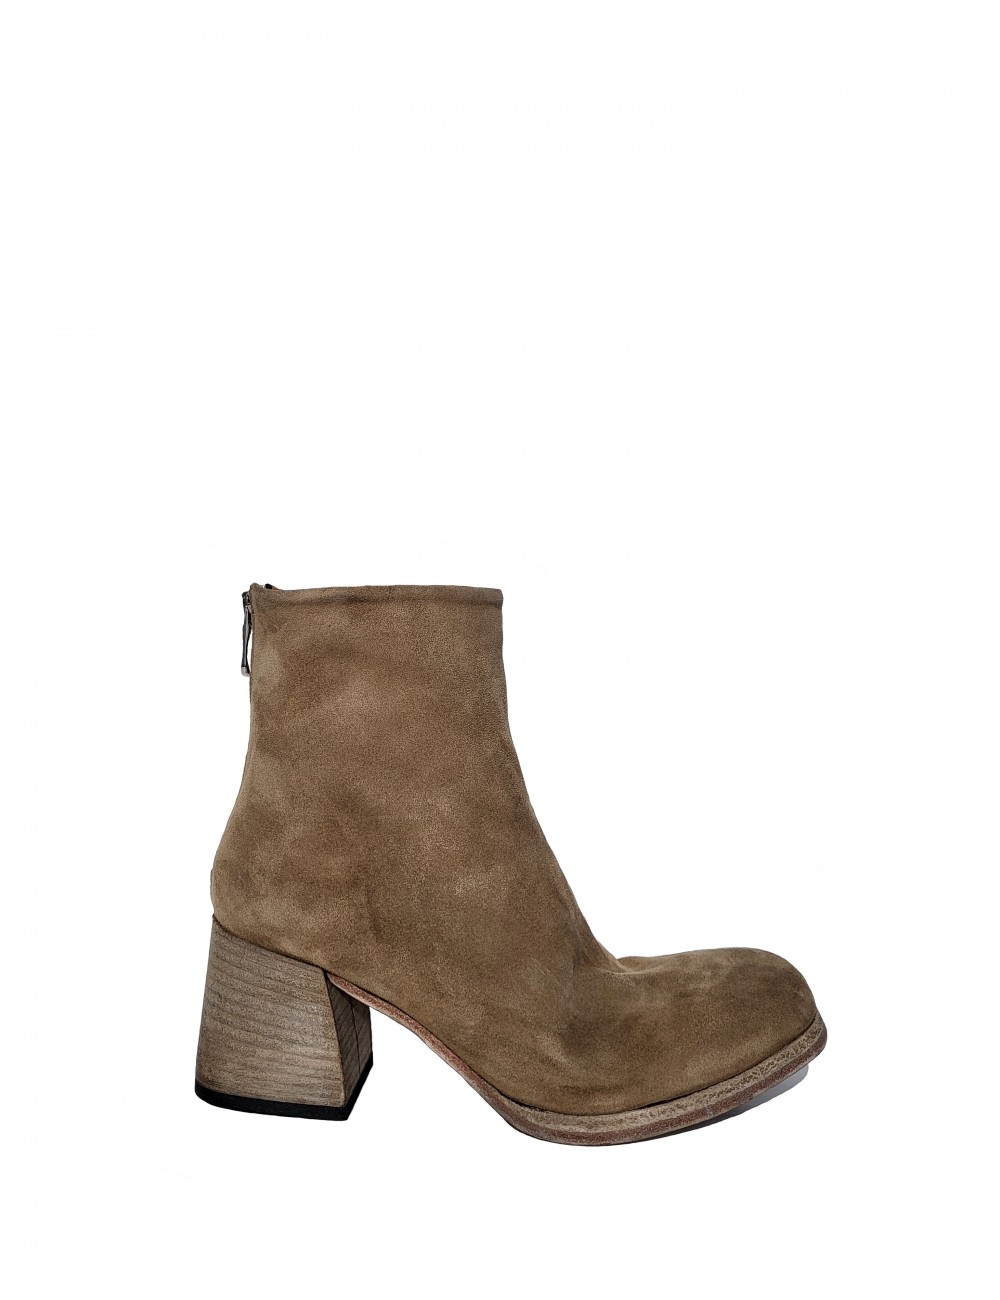 Women's ankle boots in...